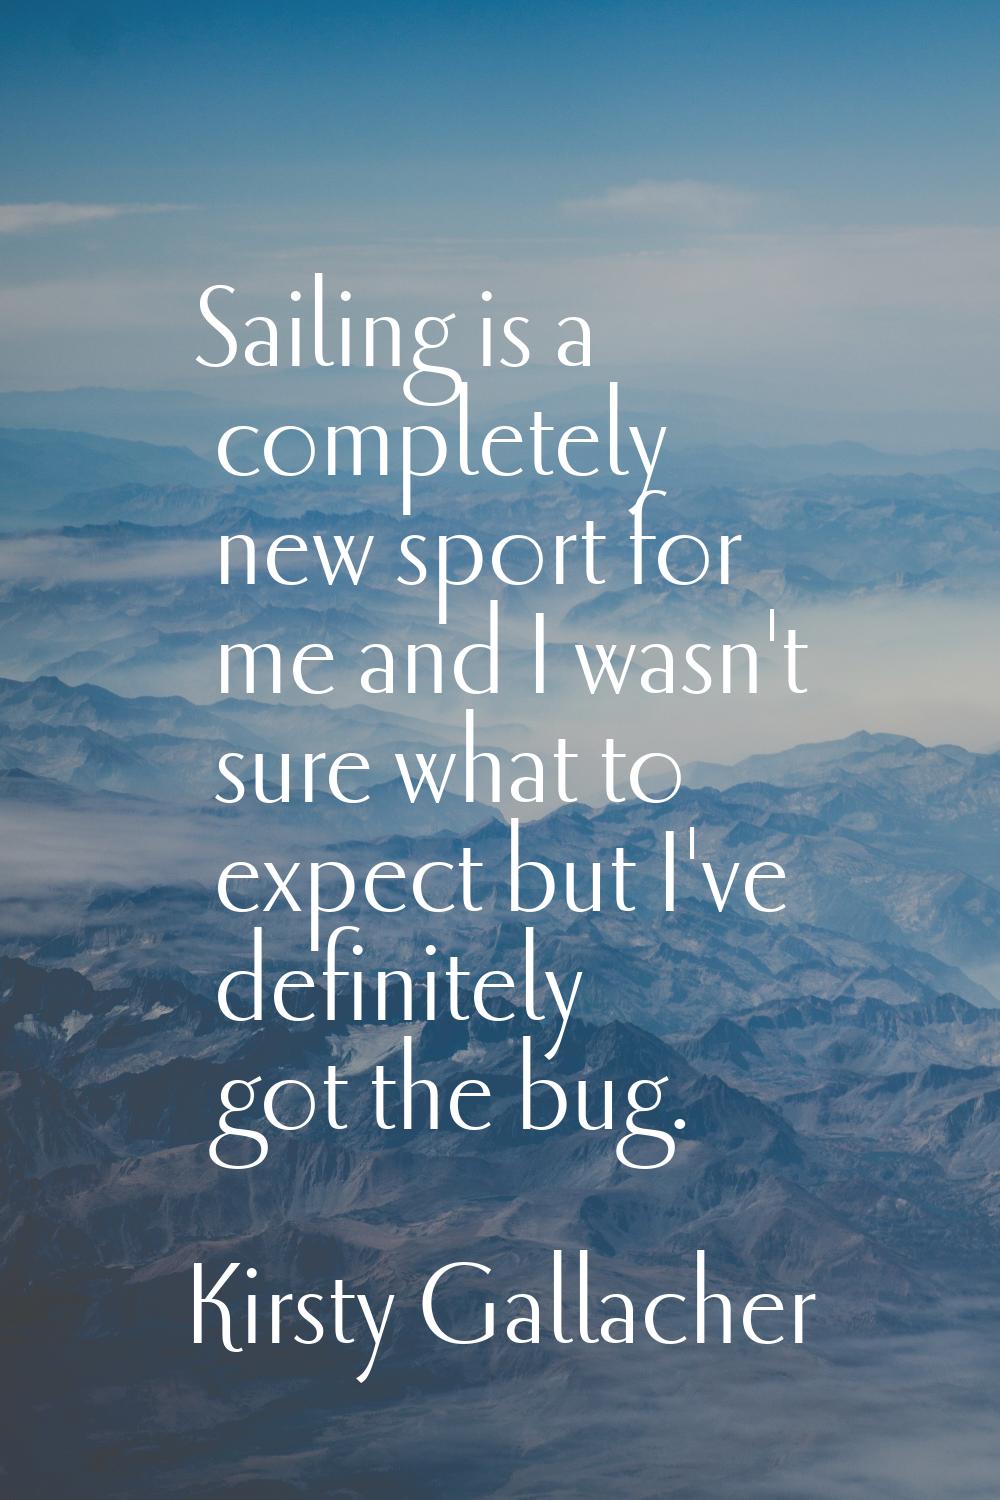 Sailing is a completely new sport for me and I wasn't sure what to expect but I've definitely got t